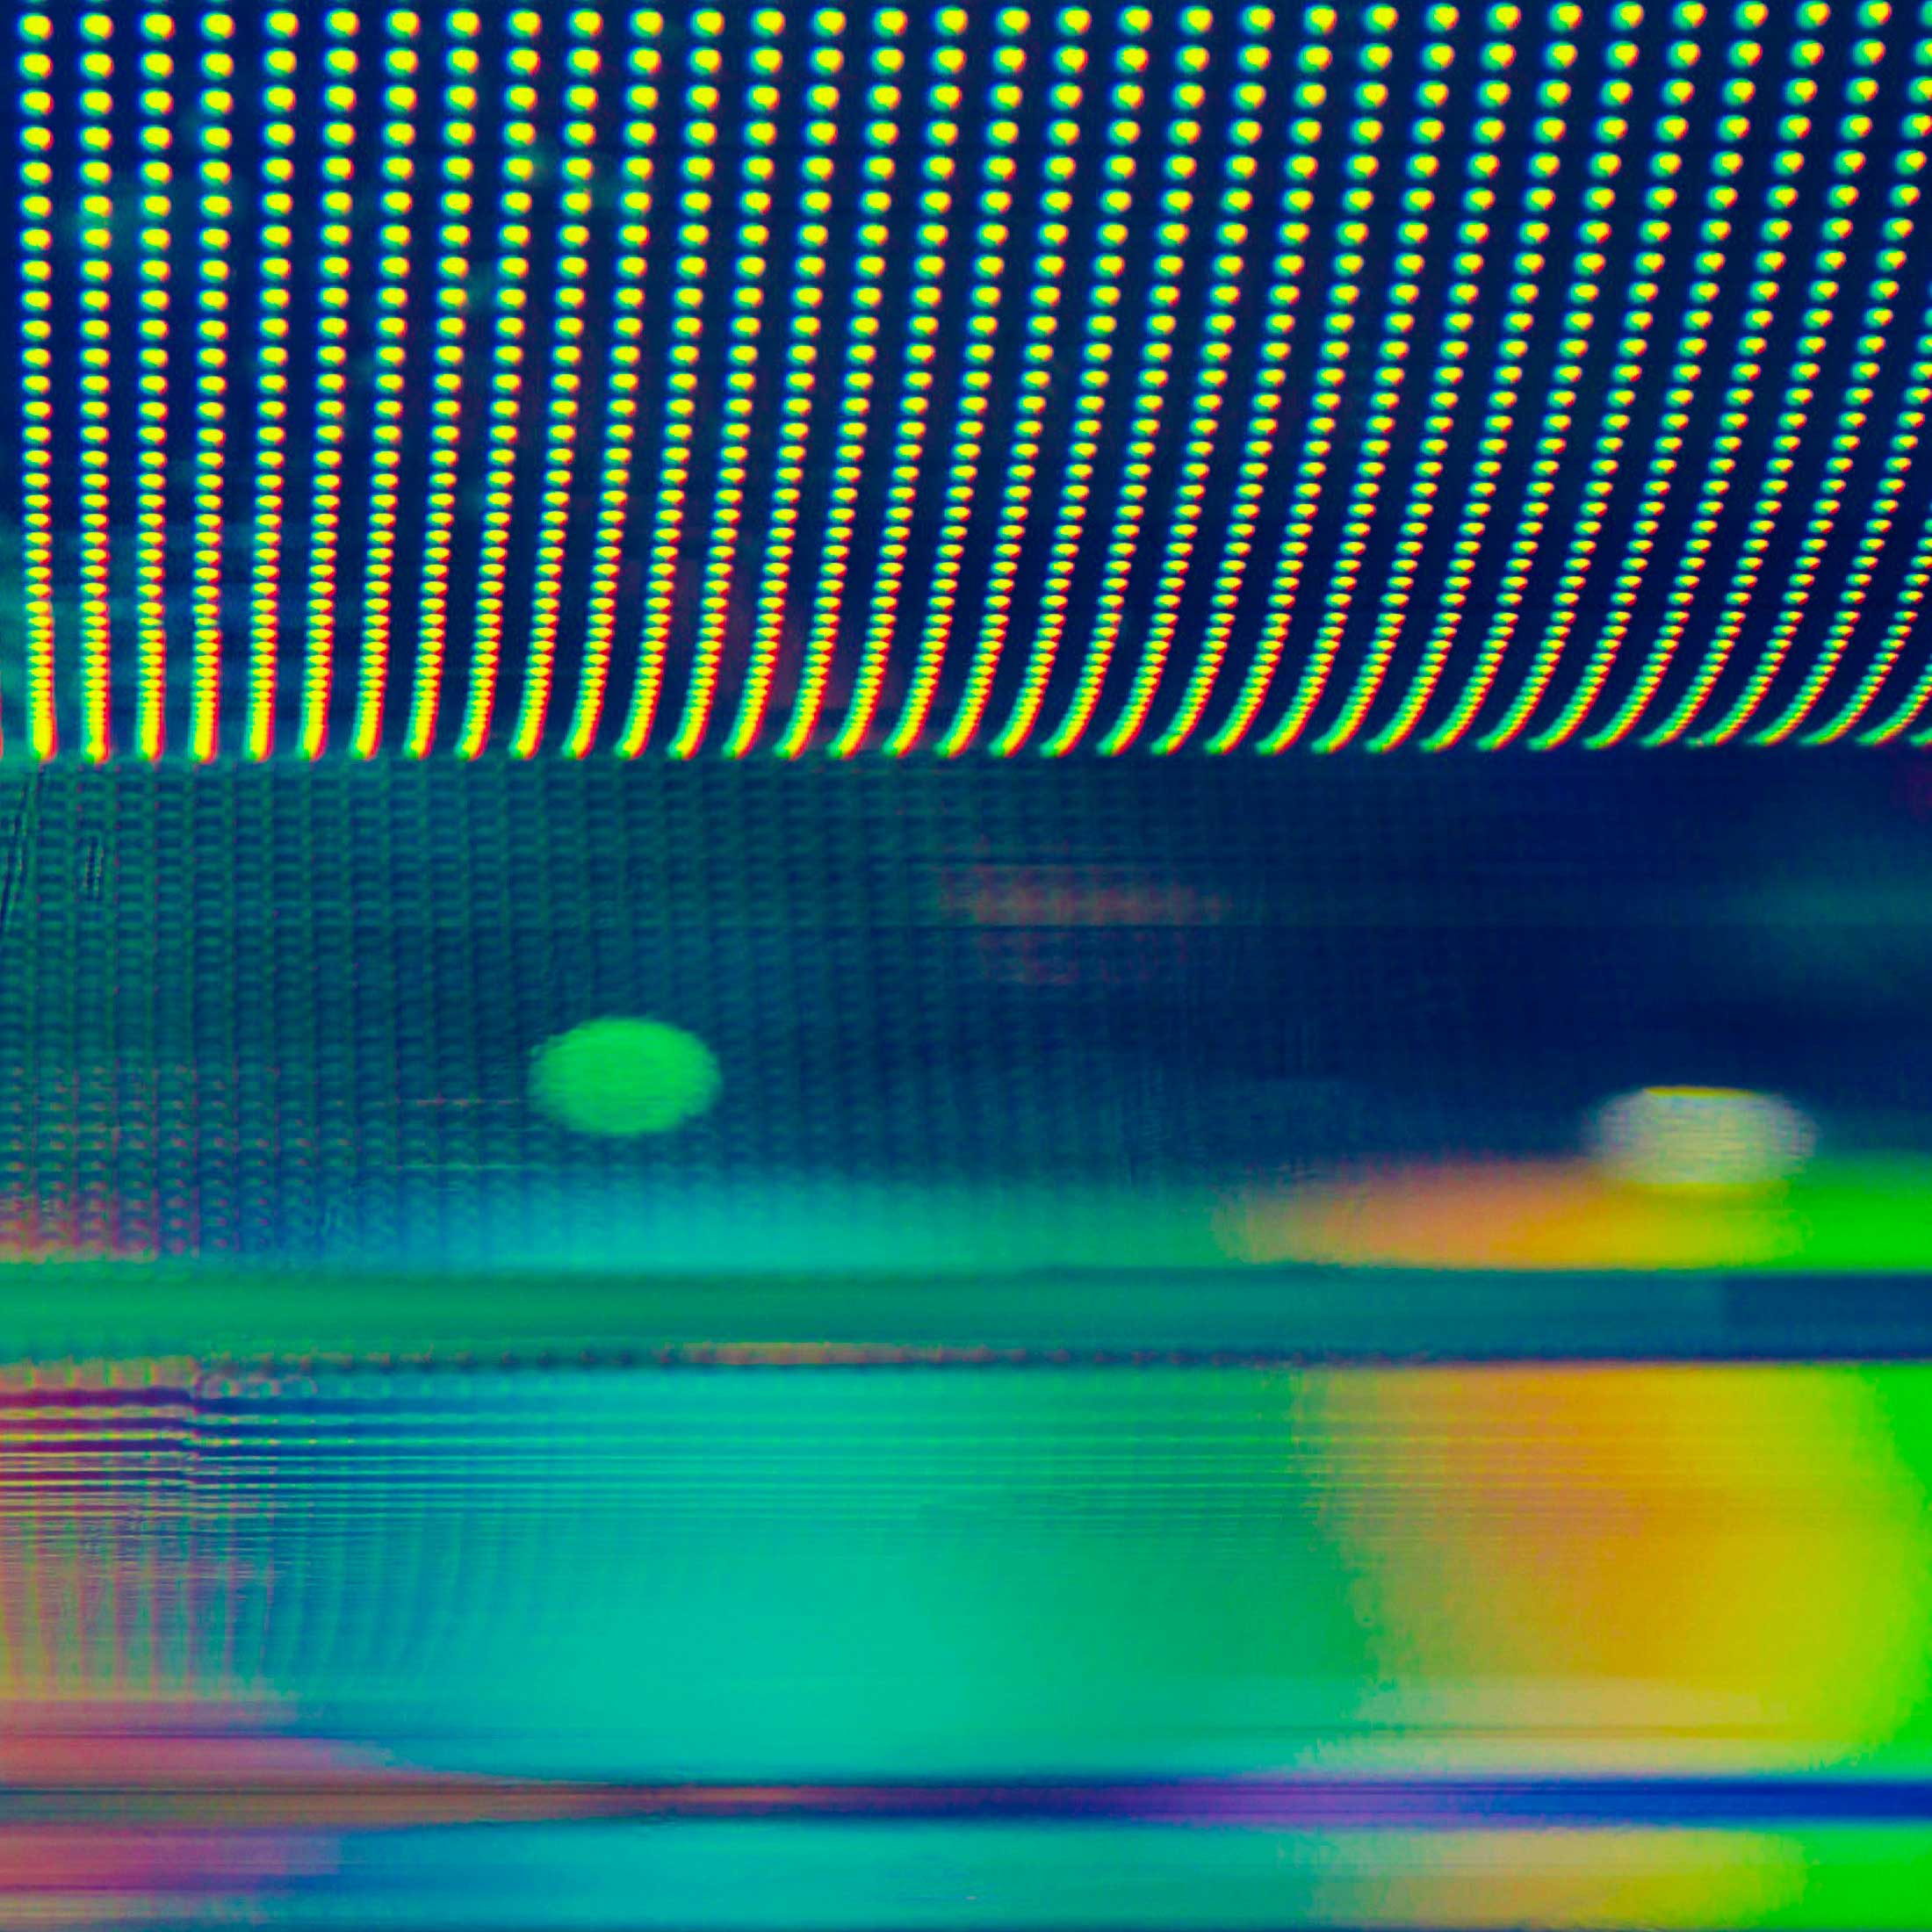 Yellow, blue and green abstract light photograph, shows dots of lights plus moving layer lights at the bottom.